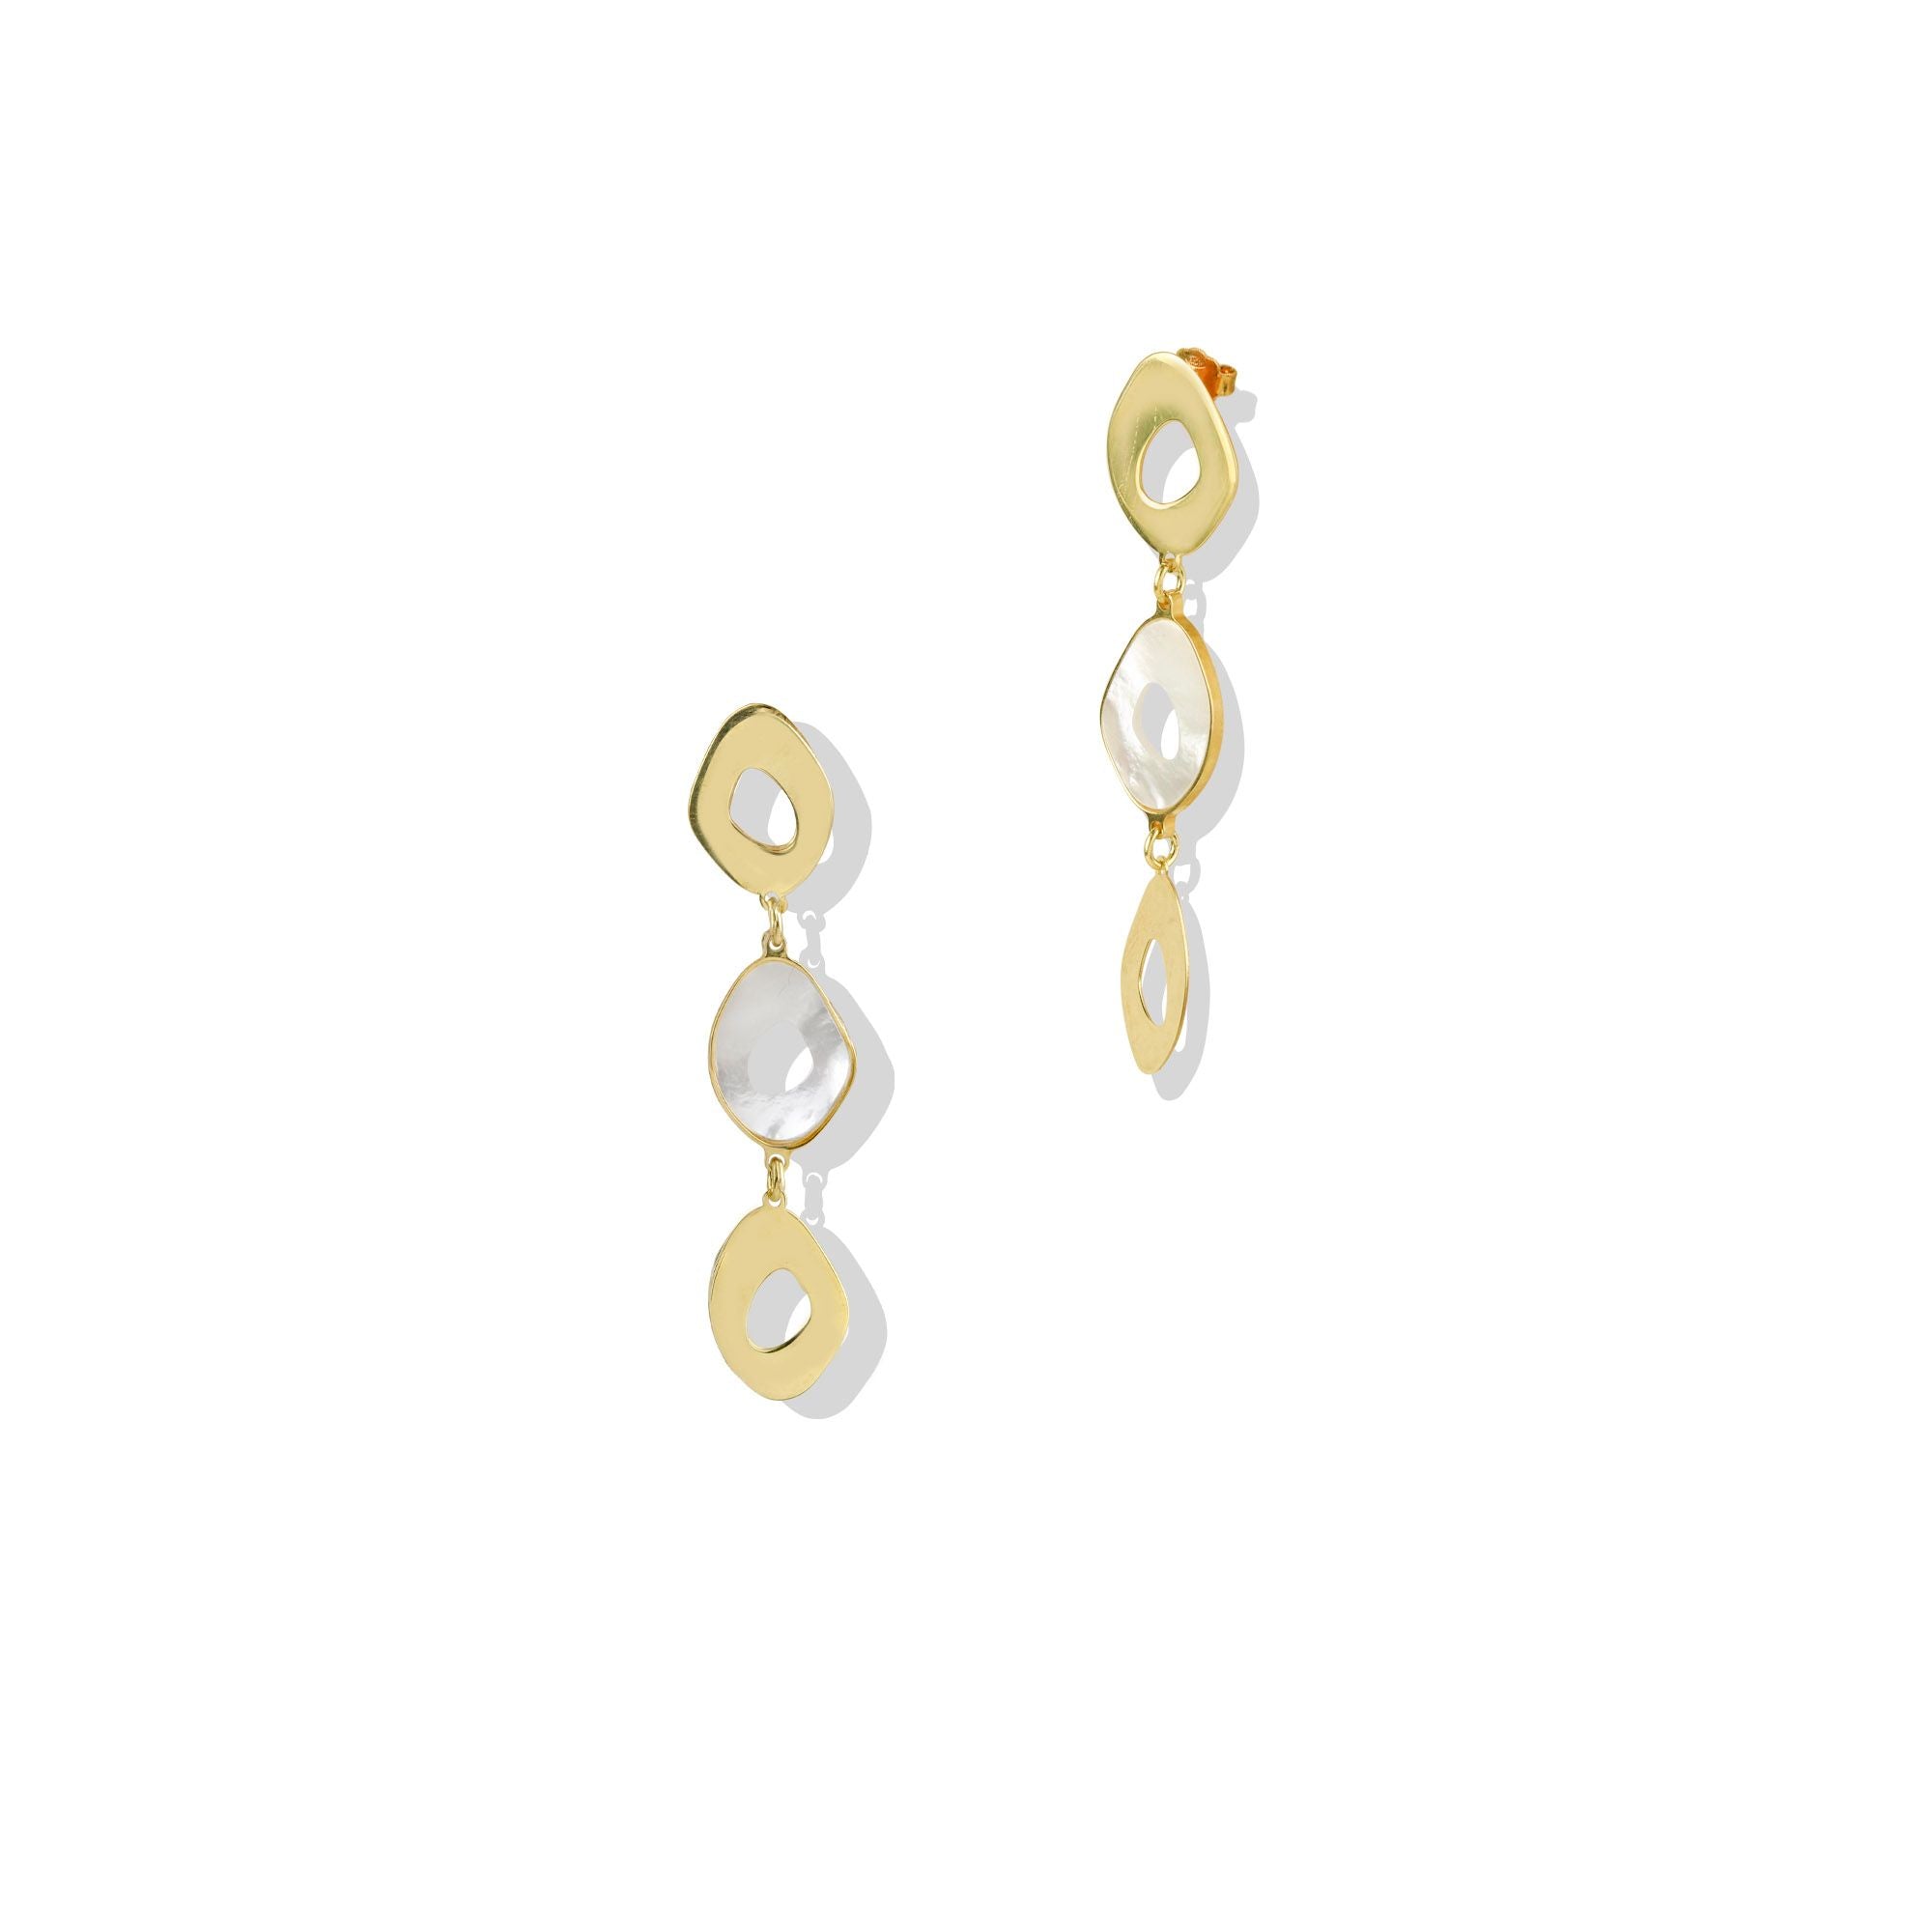 THE MOTHER OF PEARL DROP EARRING